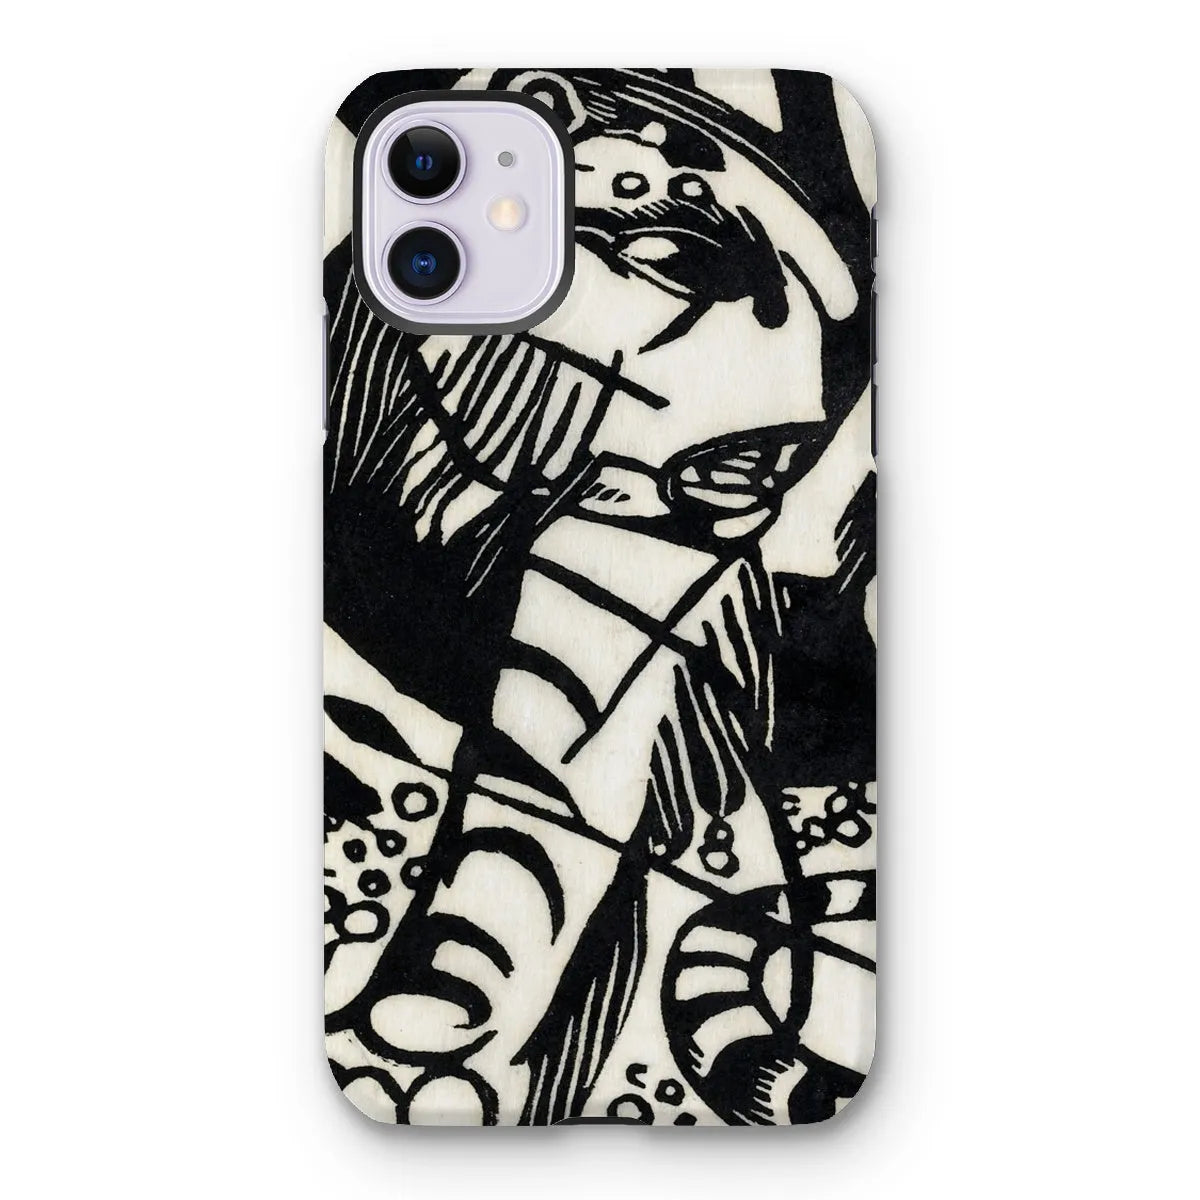 Tiger - Animal Aesthetic Phone Case - Franz Marc - Iphone 11 / Matte - Mobile Phone Cases - Aesthetic Art